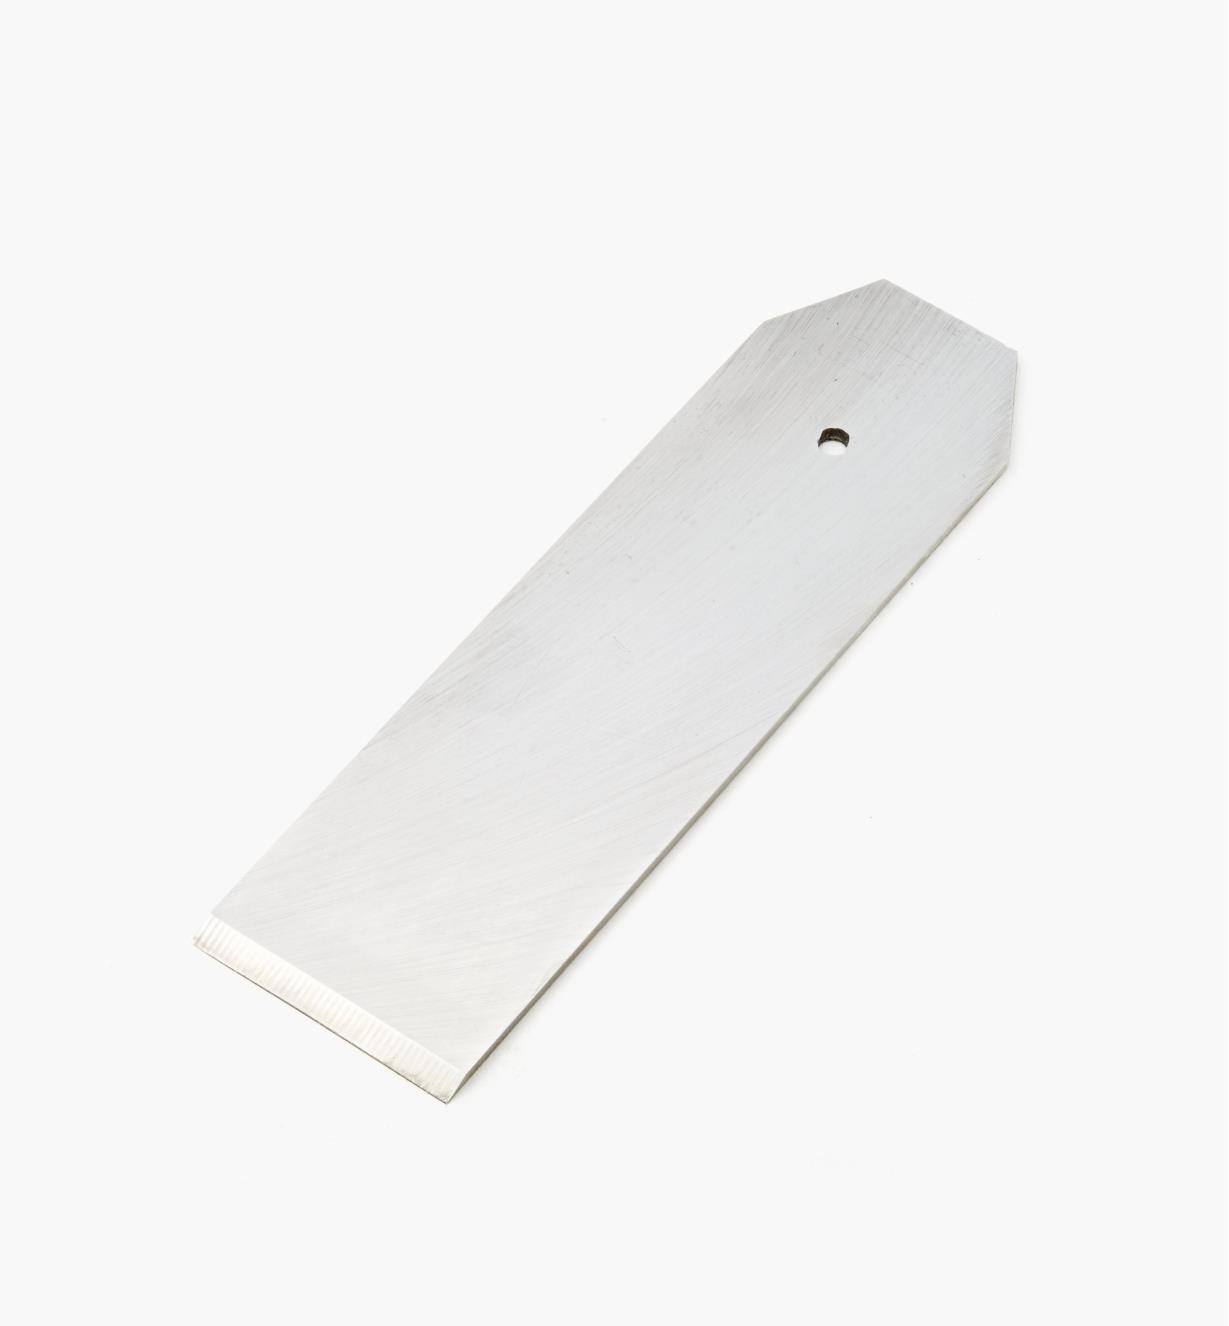 24P5239 - 39mm Replacement Blade